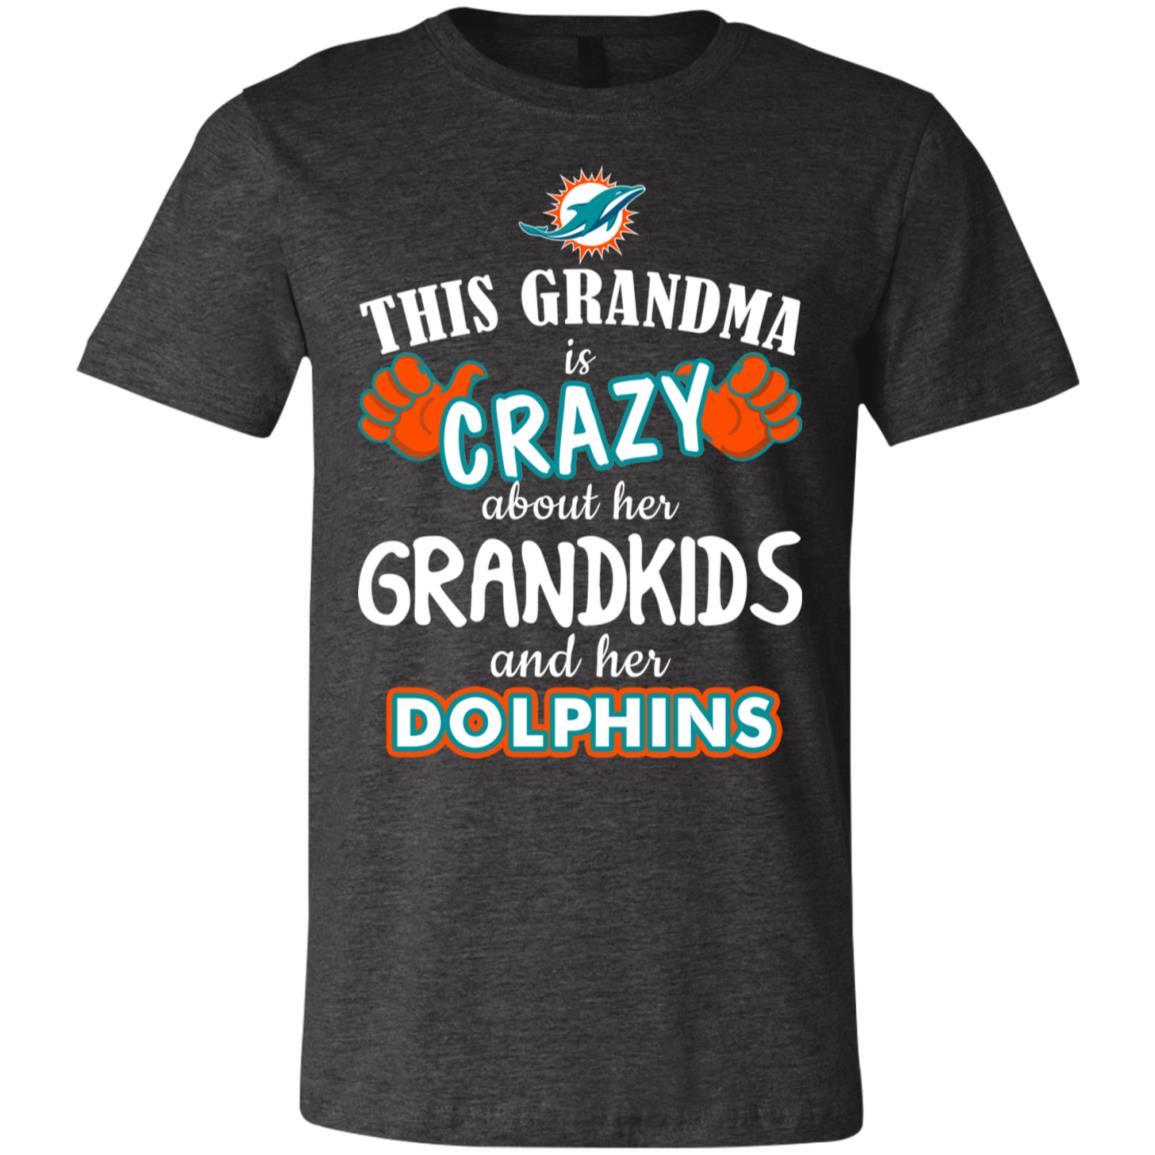 Miami Dolphins Shop - Grandma Is Crazy About Her Grandkids And Her Miami Dolphins Tshirt 2